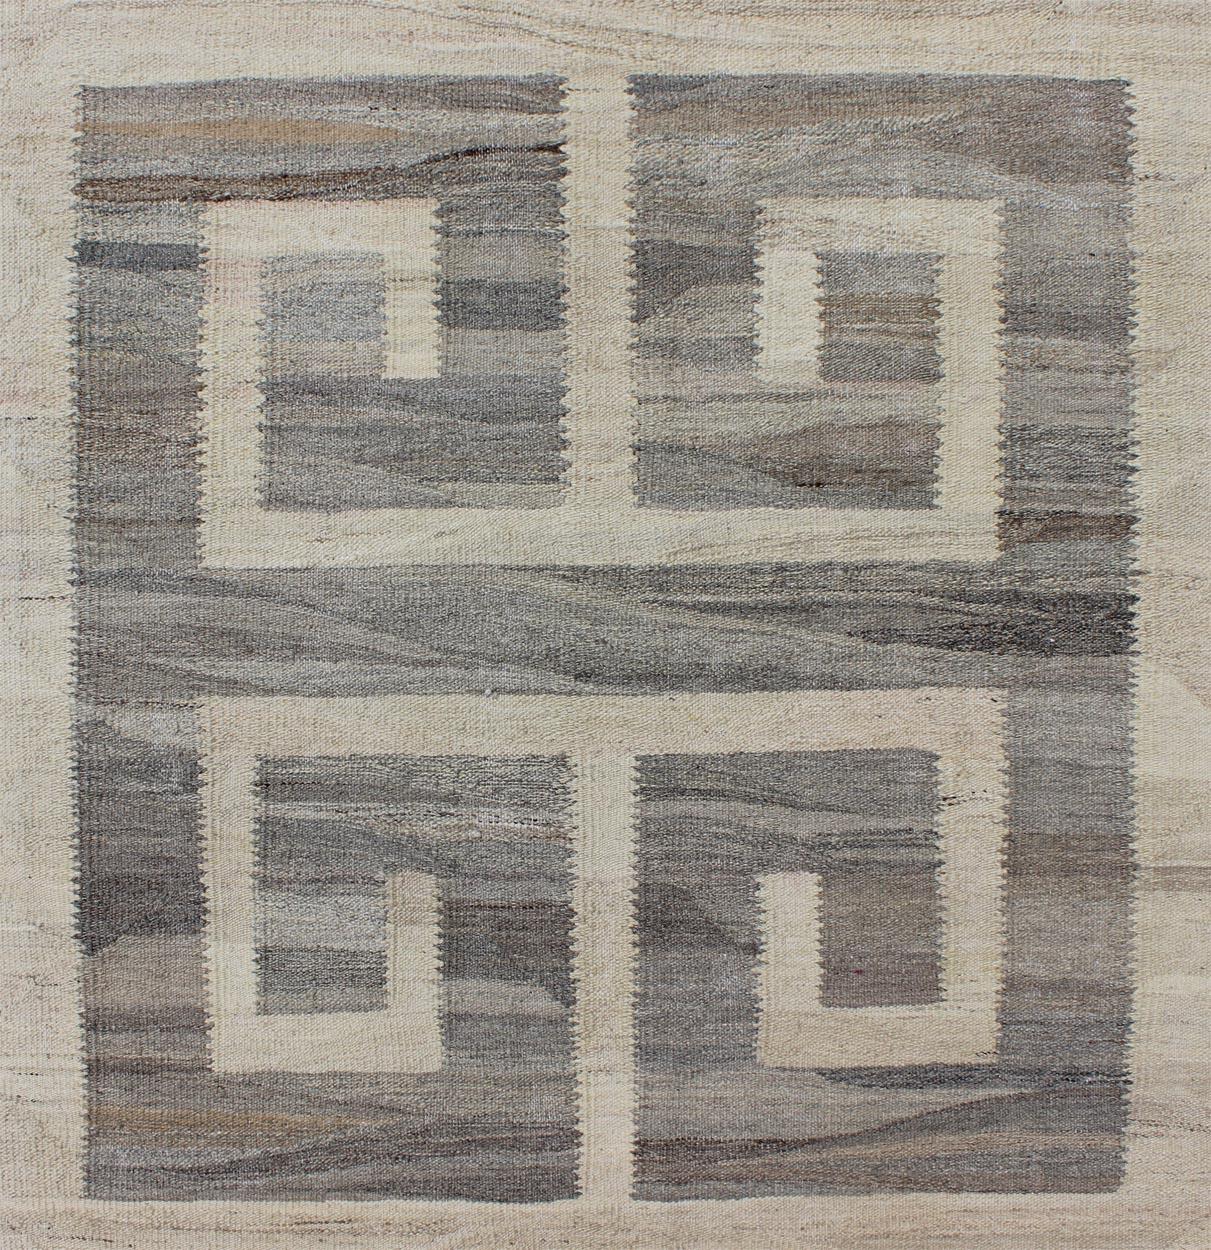 Oversized Modern Kilim with Large Scale Greek Key Design in Cream & Gray Tones For Sale 5